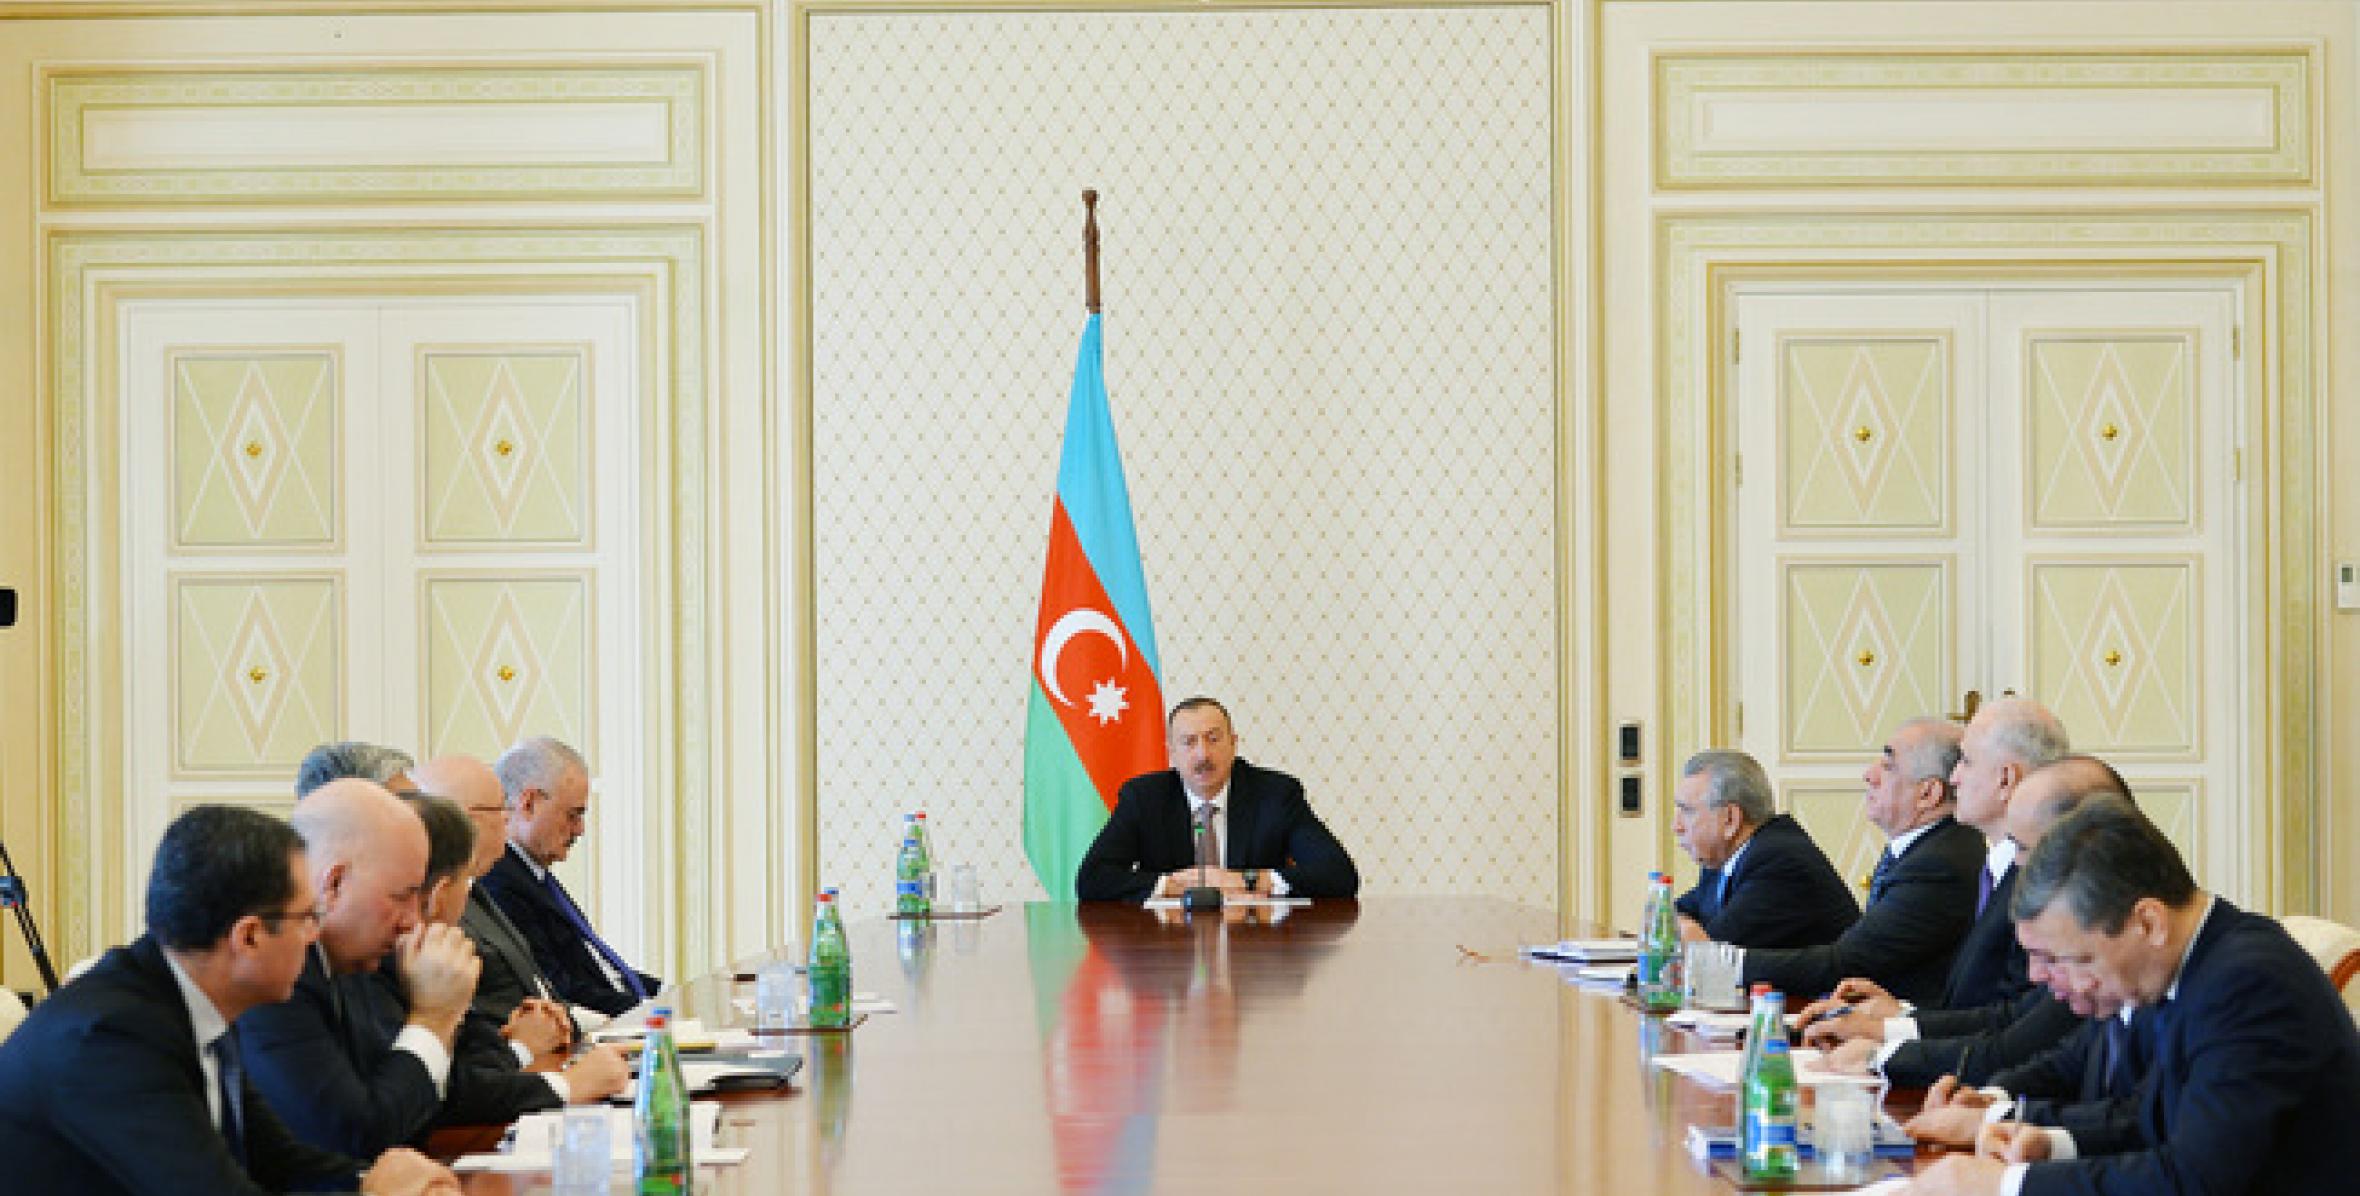 Speech by Ilham Aliyev at the meeting on economic and social issues